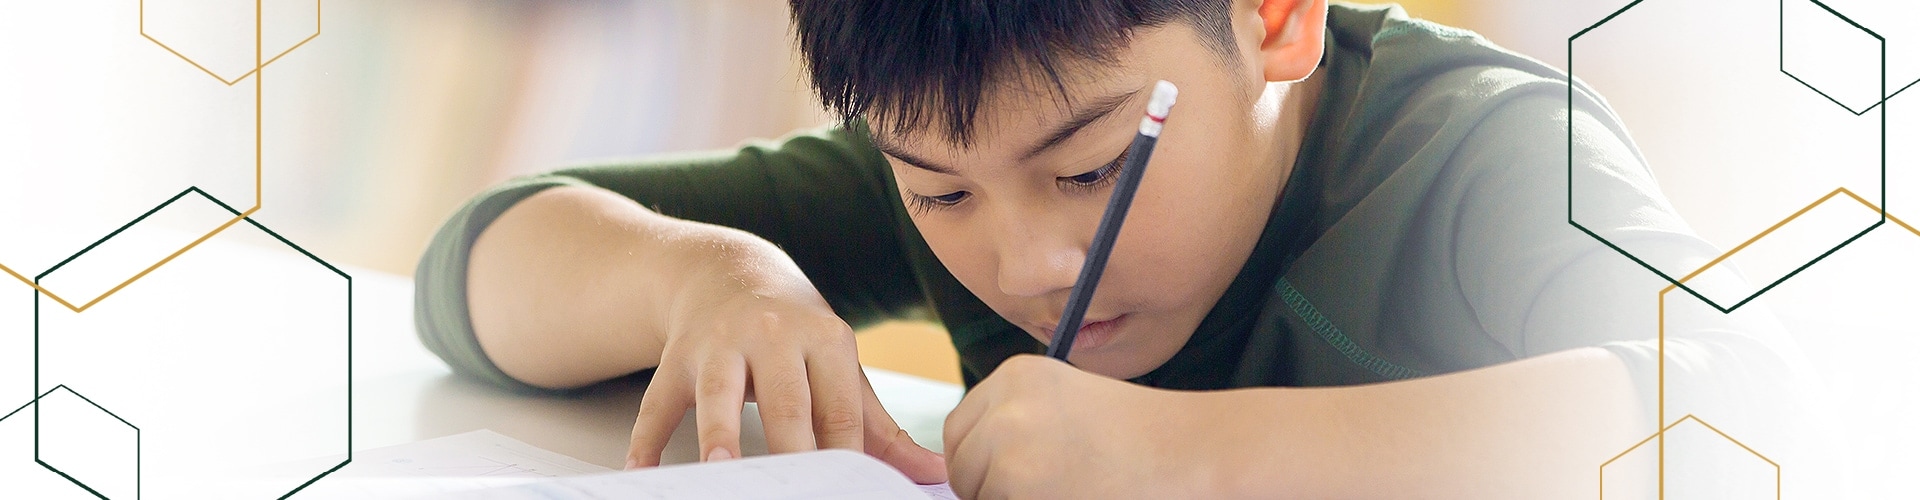 young child writing